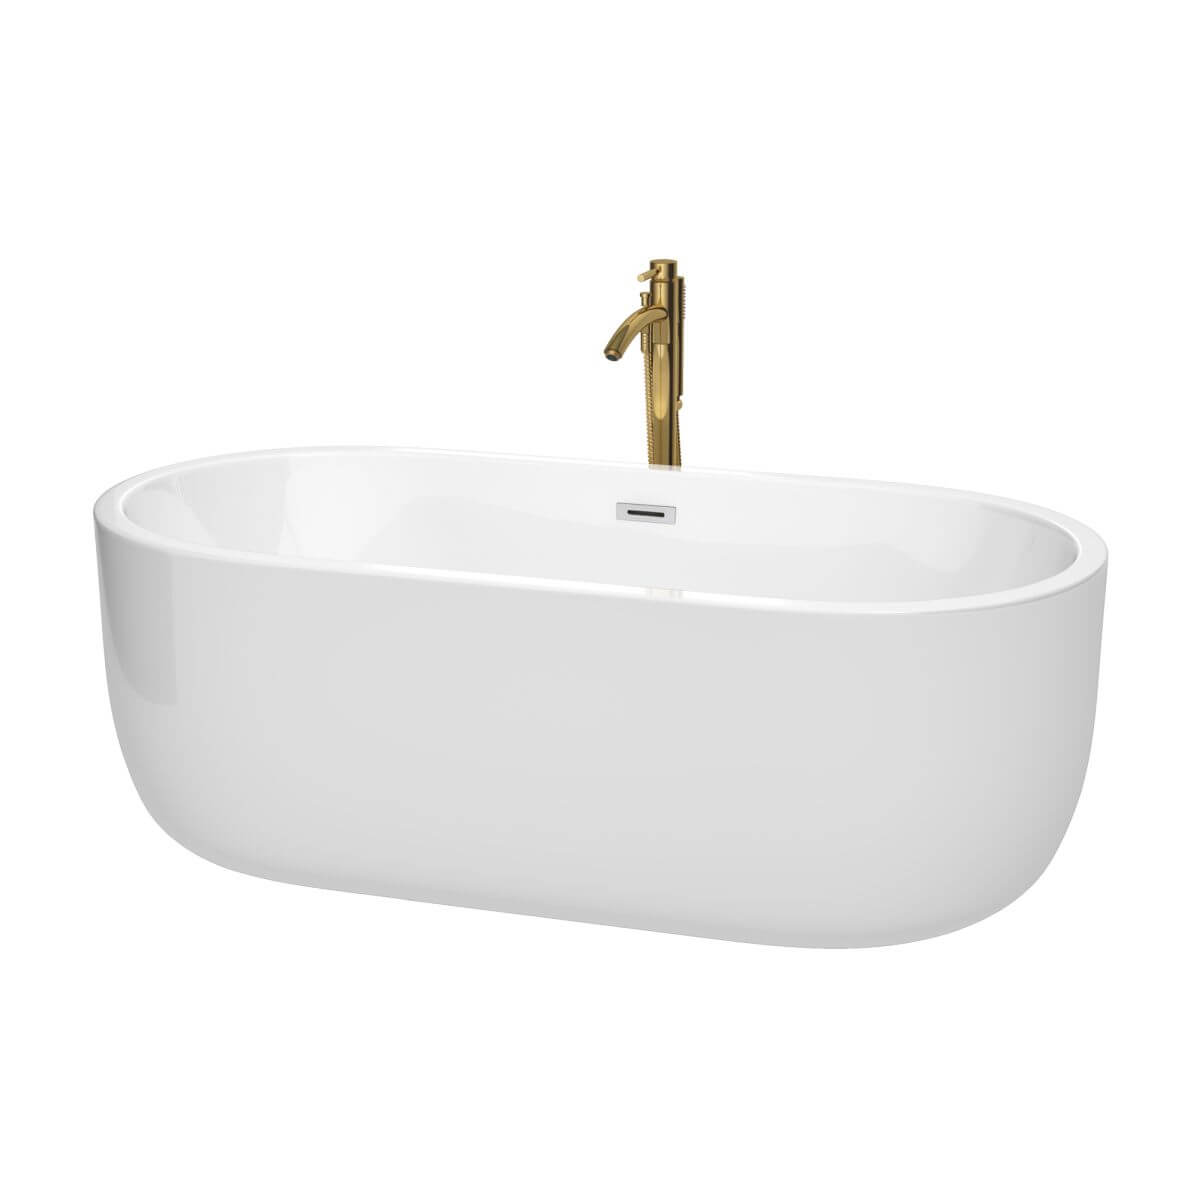 Wyndham Collection Juliette 67 inch Freestanding Bathtub in White with Polished Chrome Trim and Floor Mounted Faucet in Brushed Gold - WCOBT101367PCATPGD